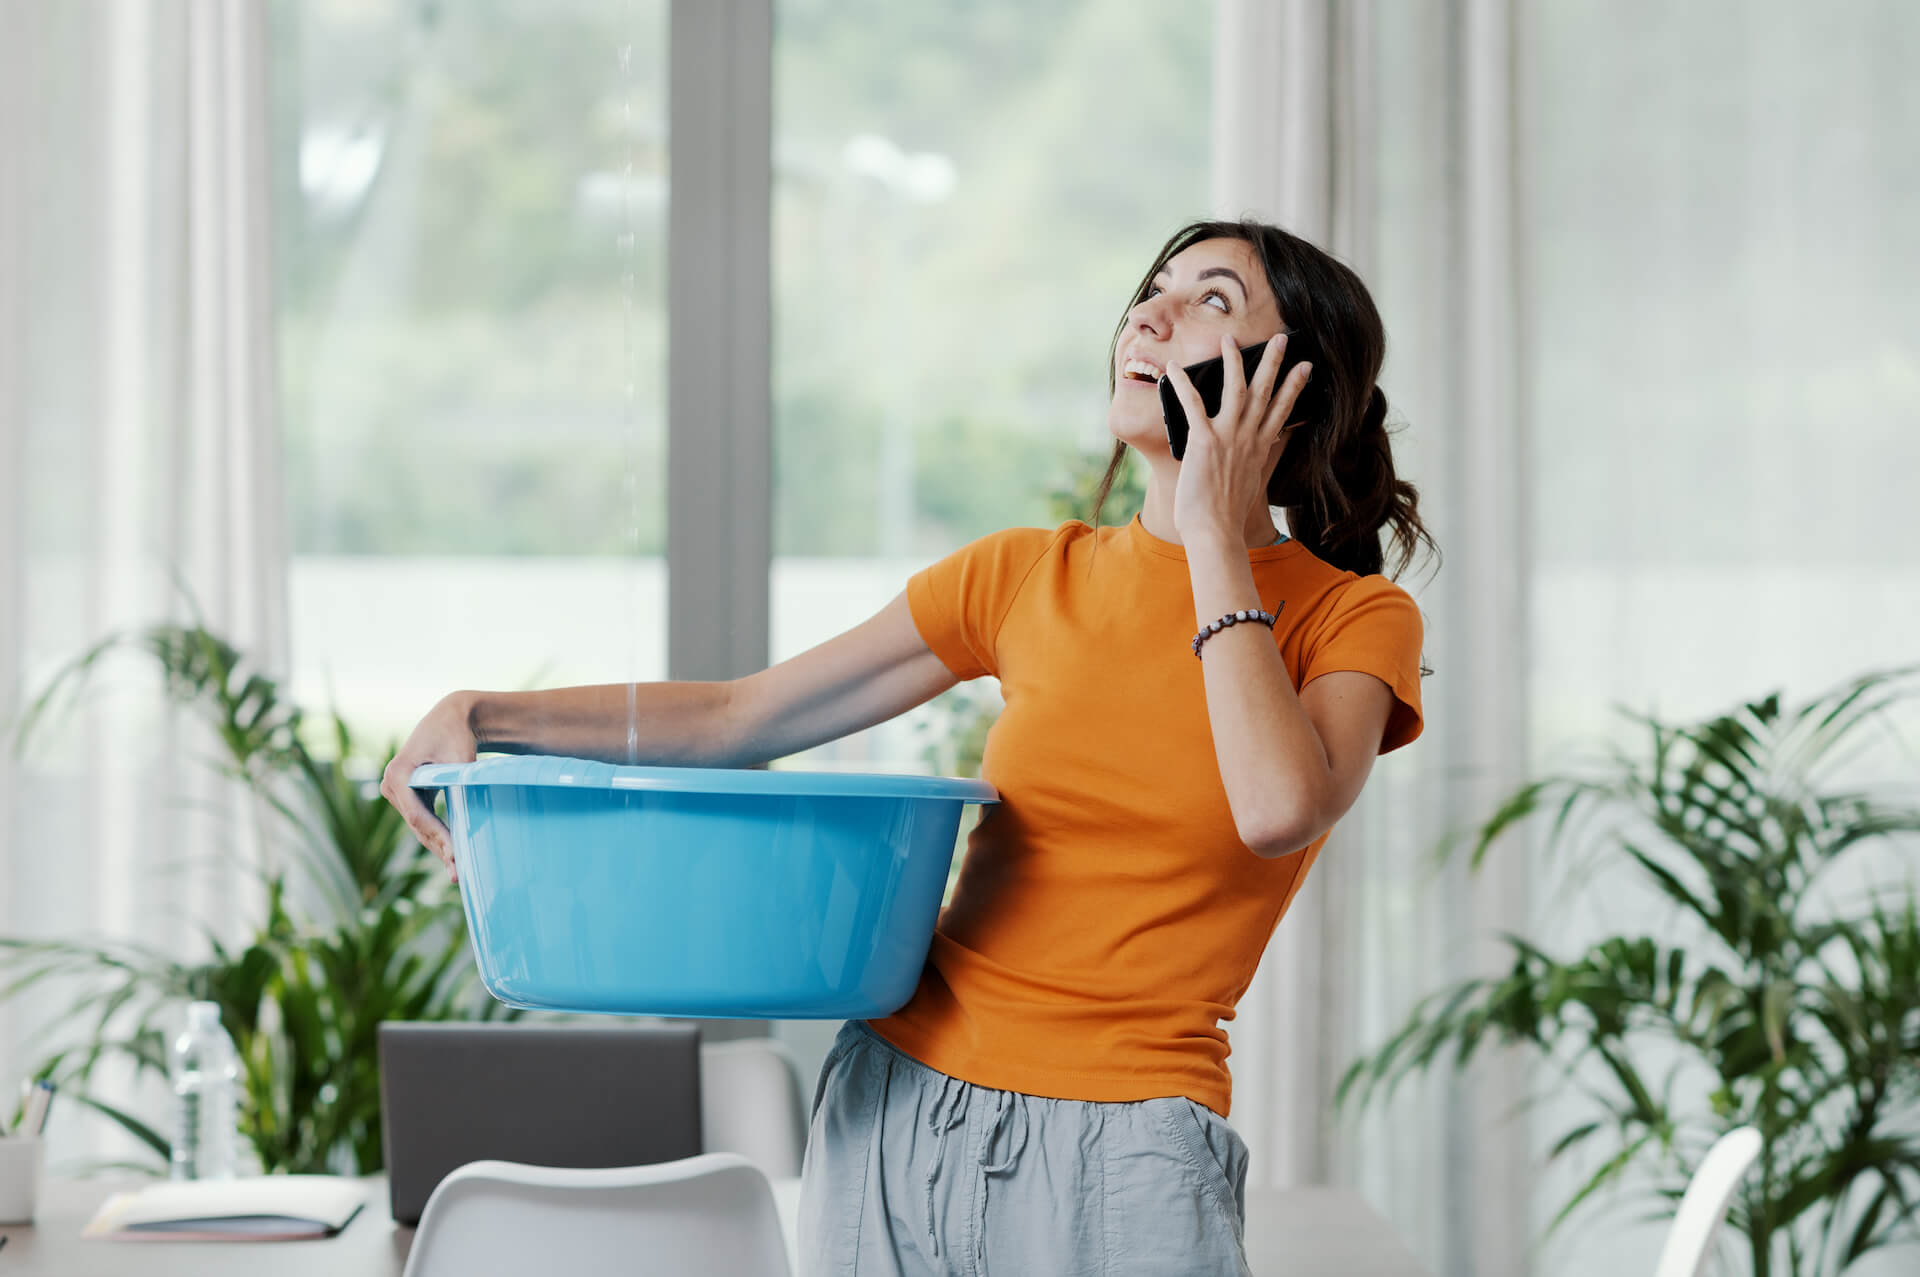 Woman calling for water leak repair while collecting water leaking from the ceiling in a bucket | Featured image for the Plumbing Repair Services Page from Akins Plumbing.